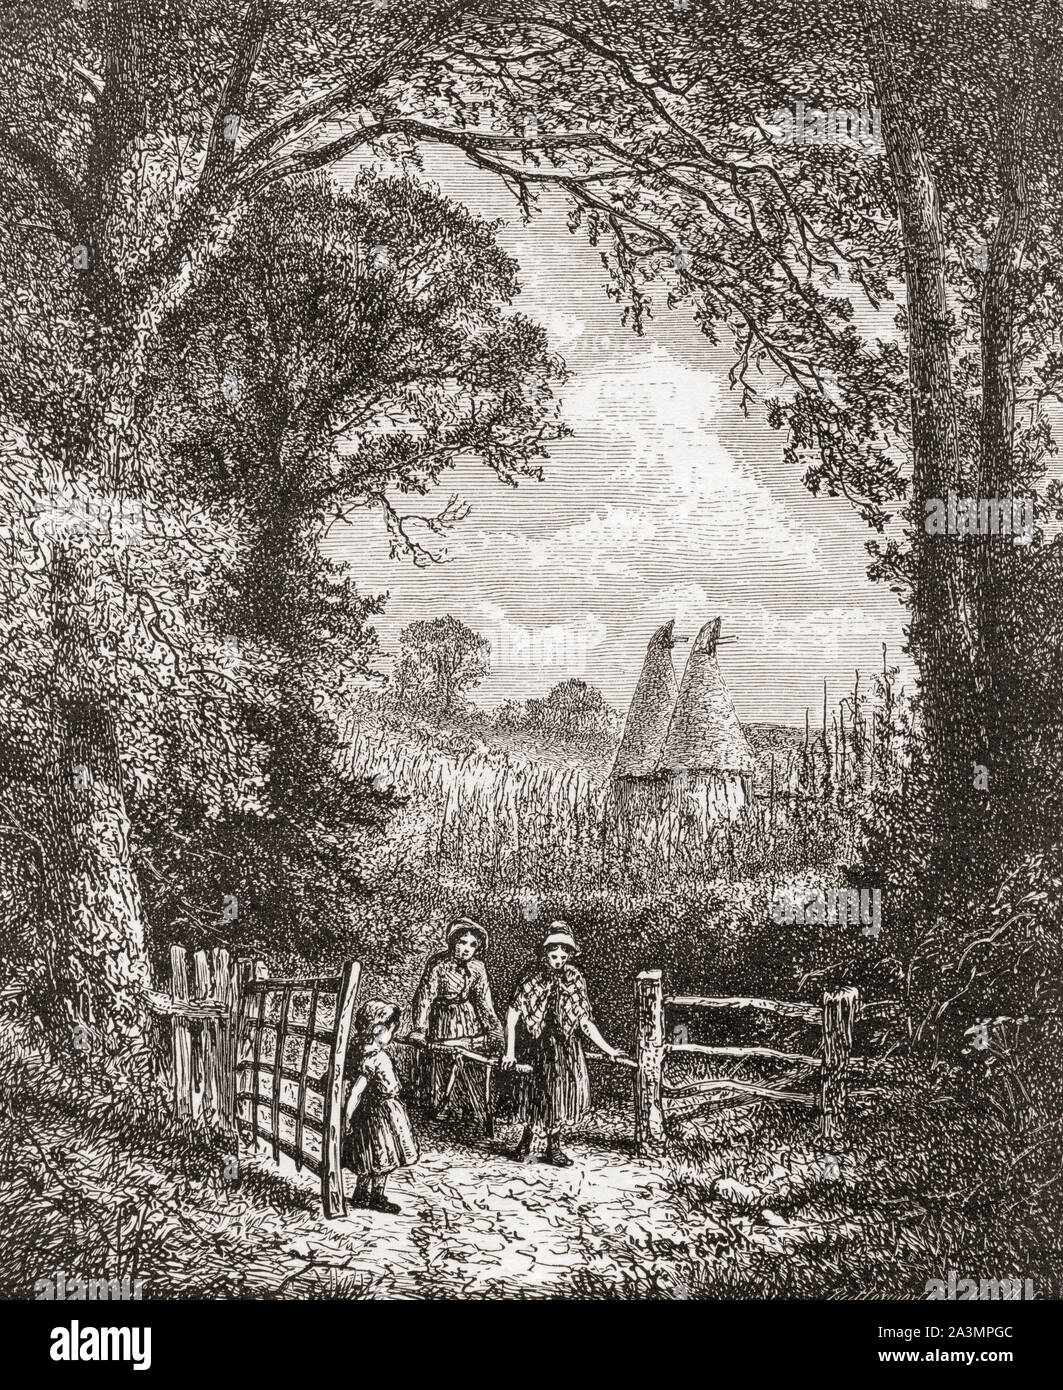 An English hop garden in the 19th century.  Hops are used as a bittering, flavouring, and stability agent in beer.  From English Pictures, published 1890. Stock Photo